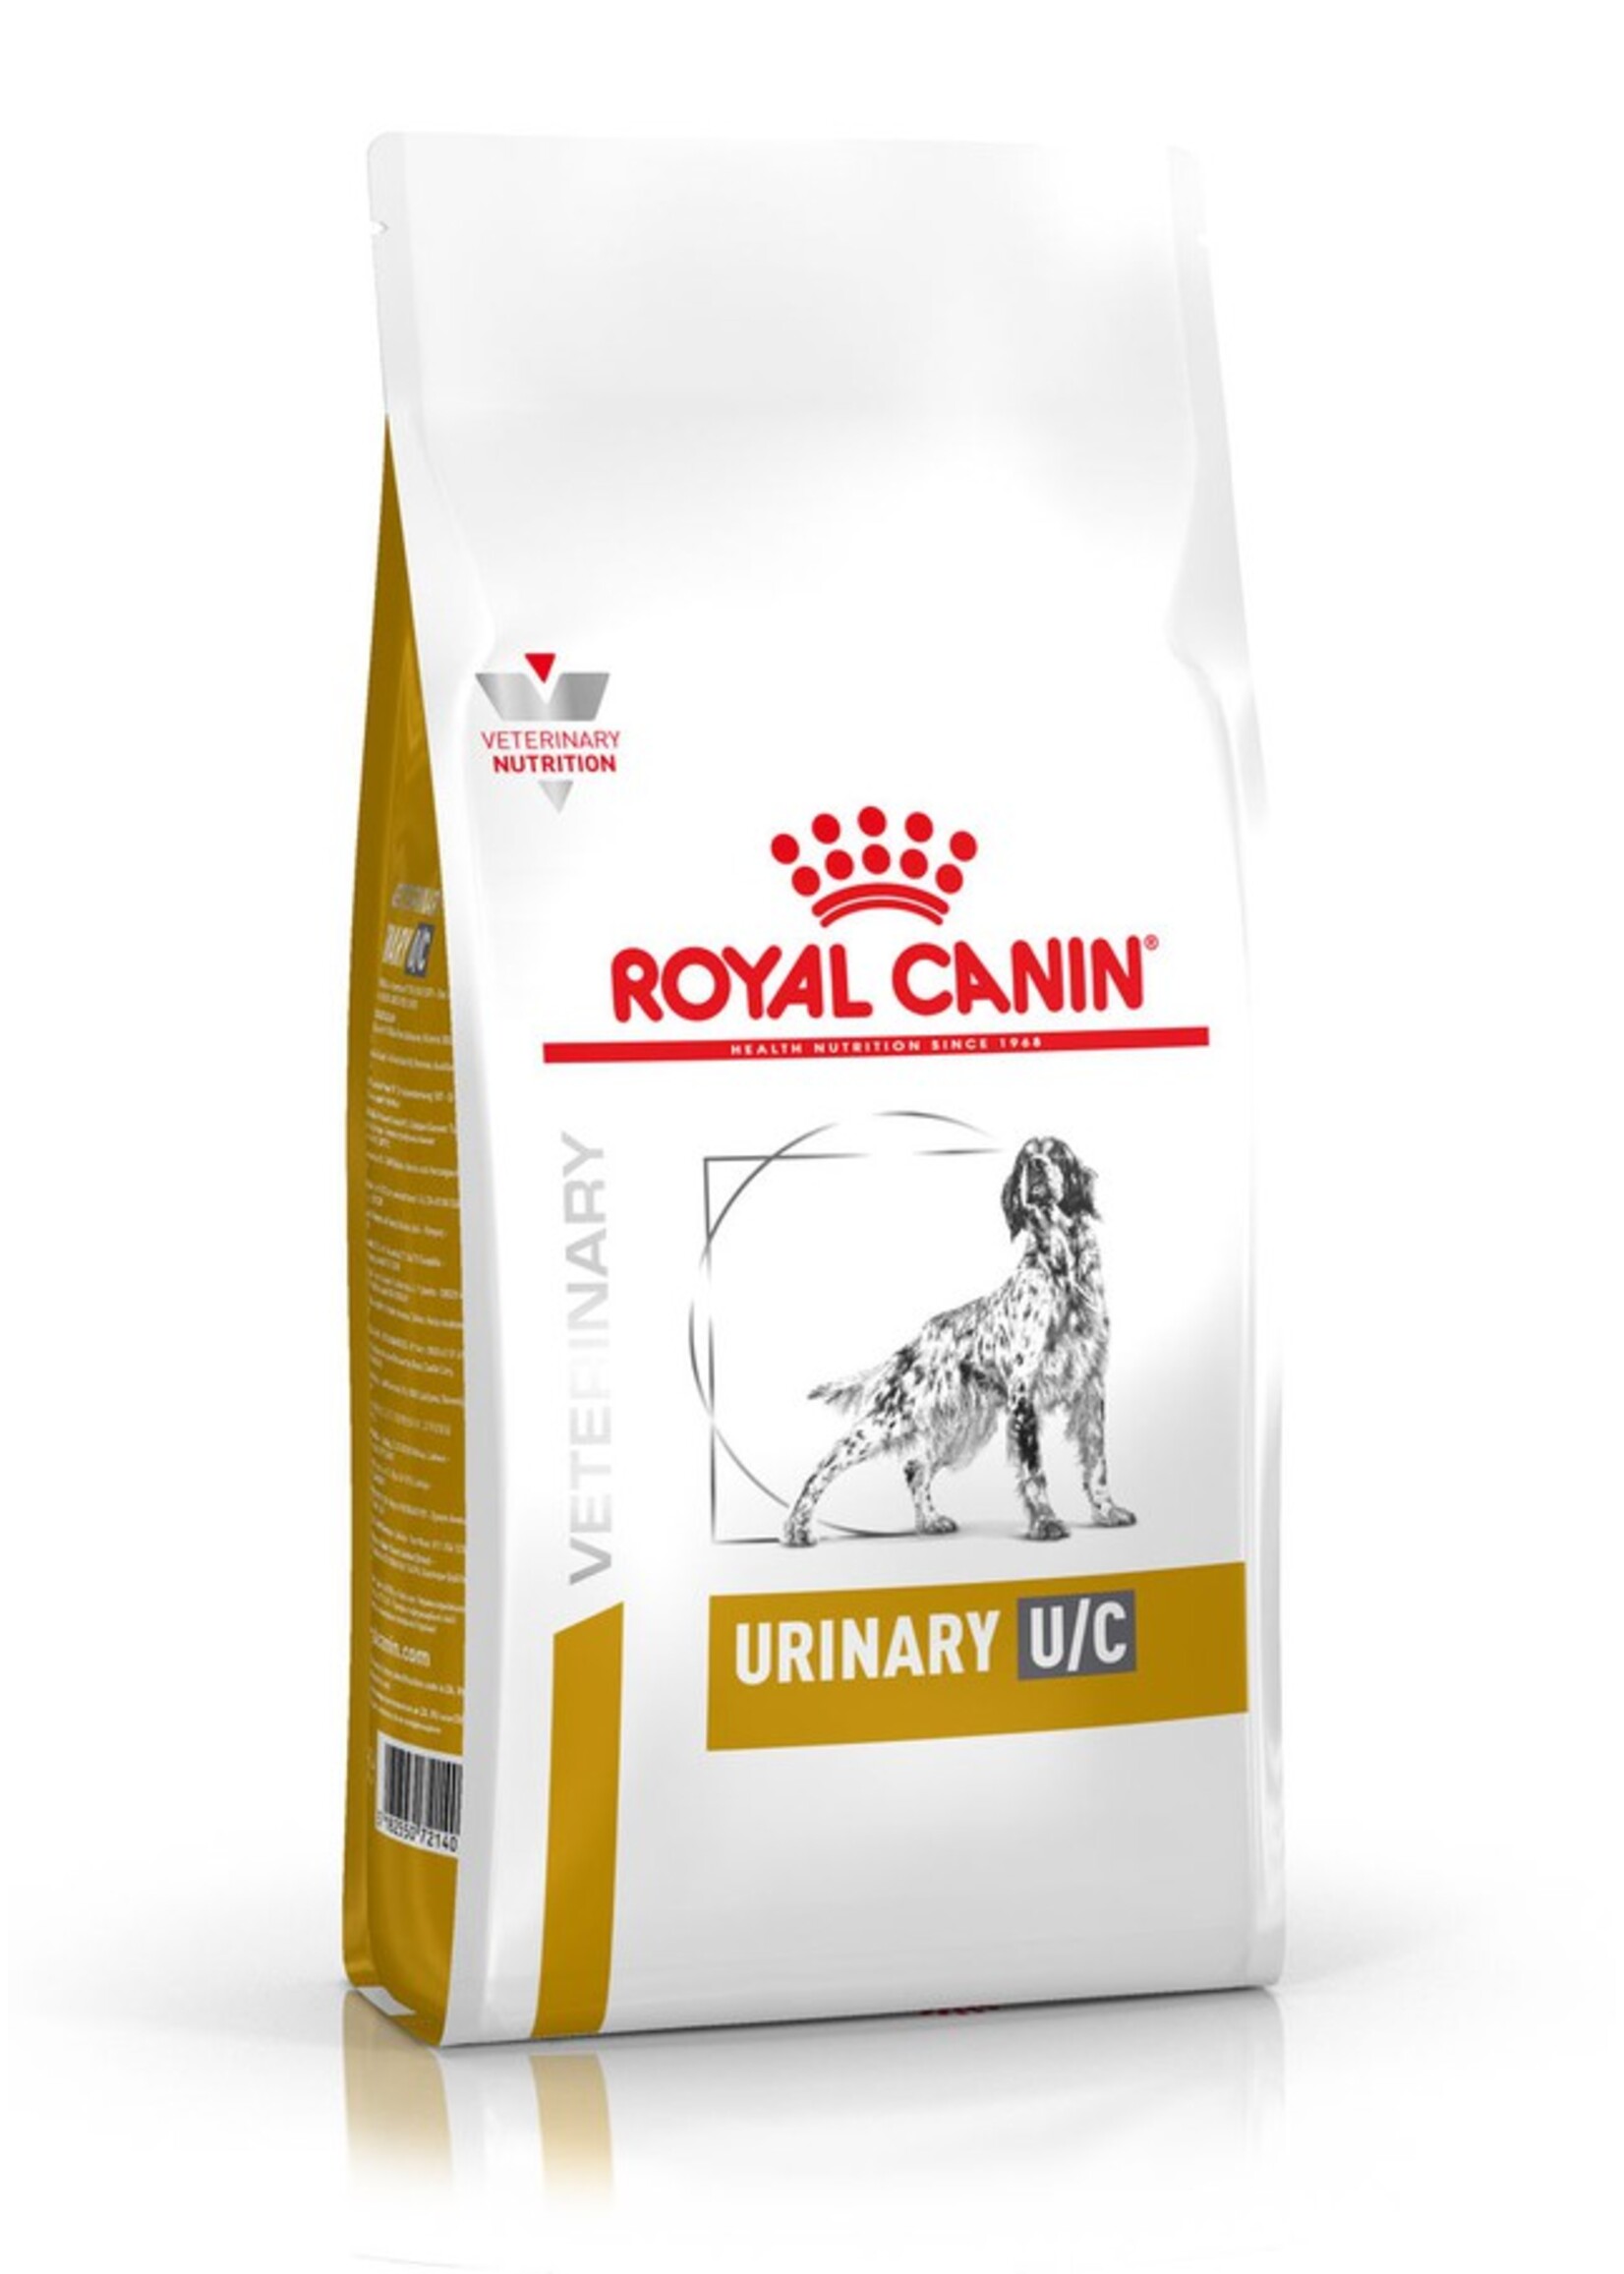 Royal Canin Royal Canin Urinary U/c Low Purine Chien 2kg